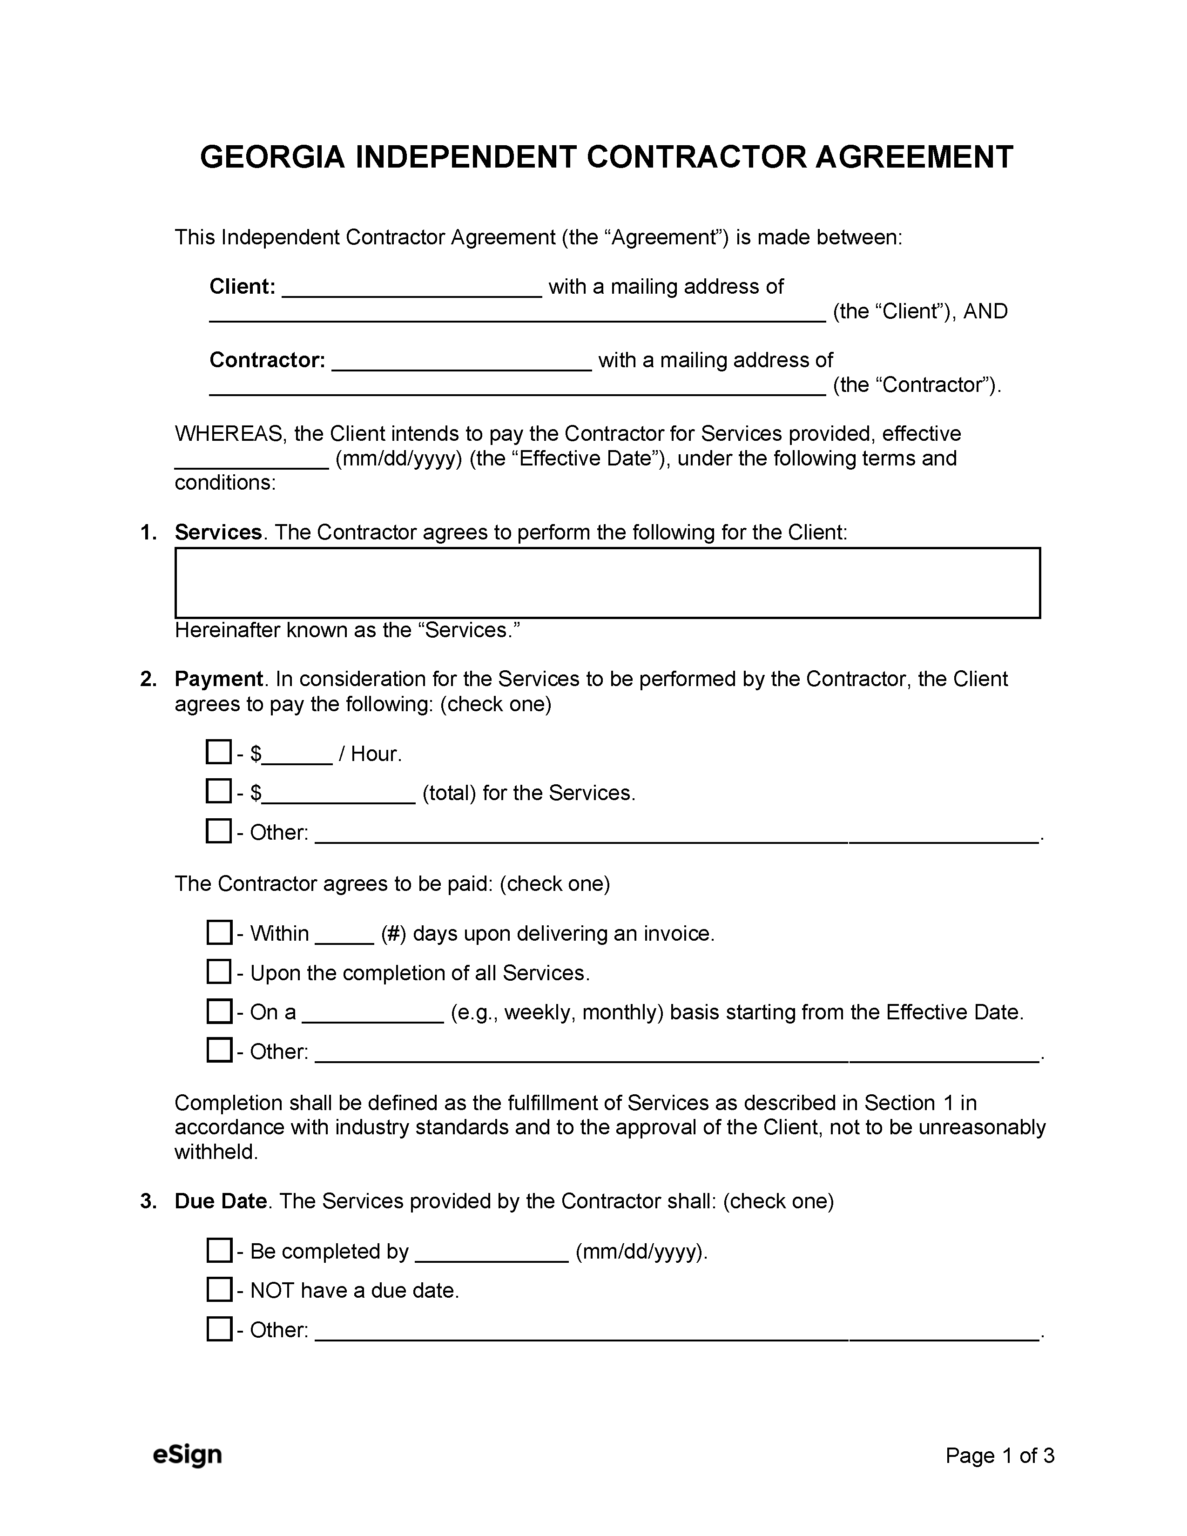 Free Georgia Independent Contractor Agreement PDF Word